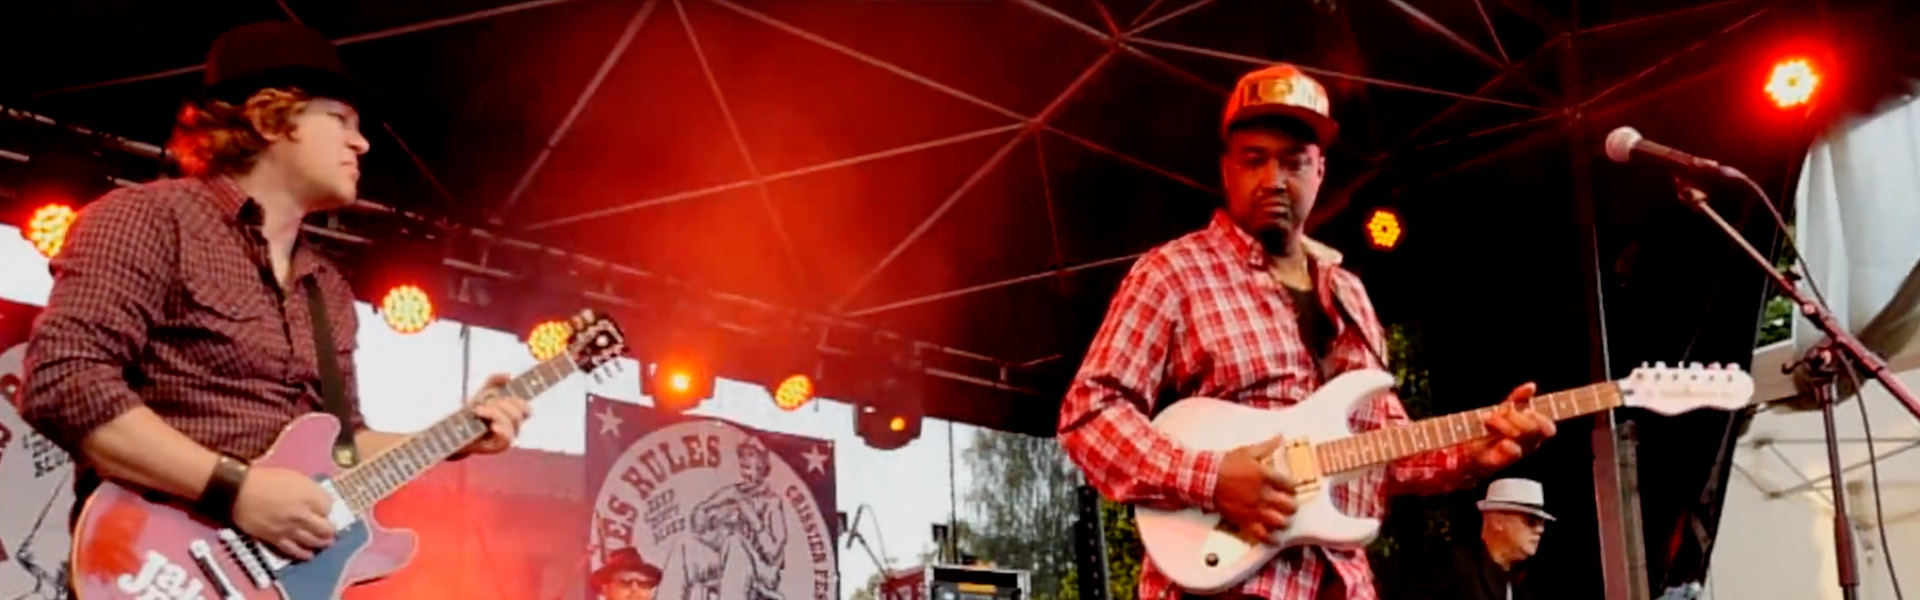 Janky Does Switzerland’s Blues Rules Festival with Robert Kimbrough, Sr.